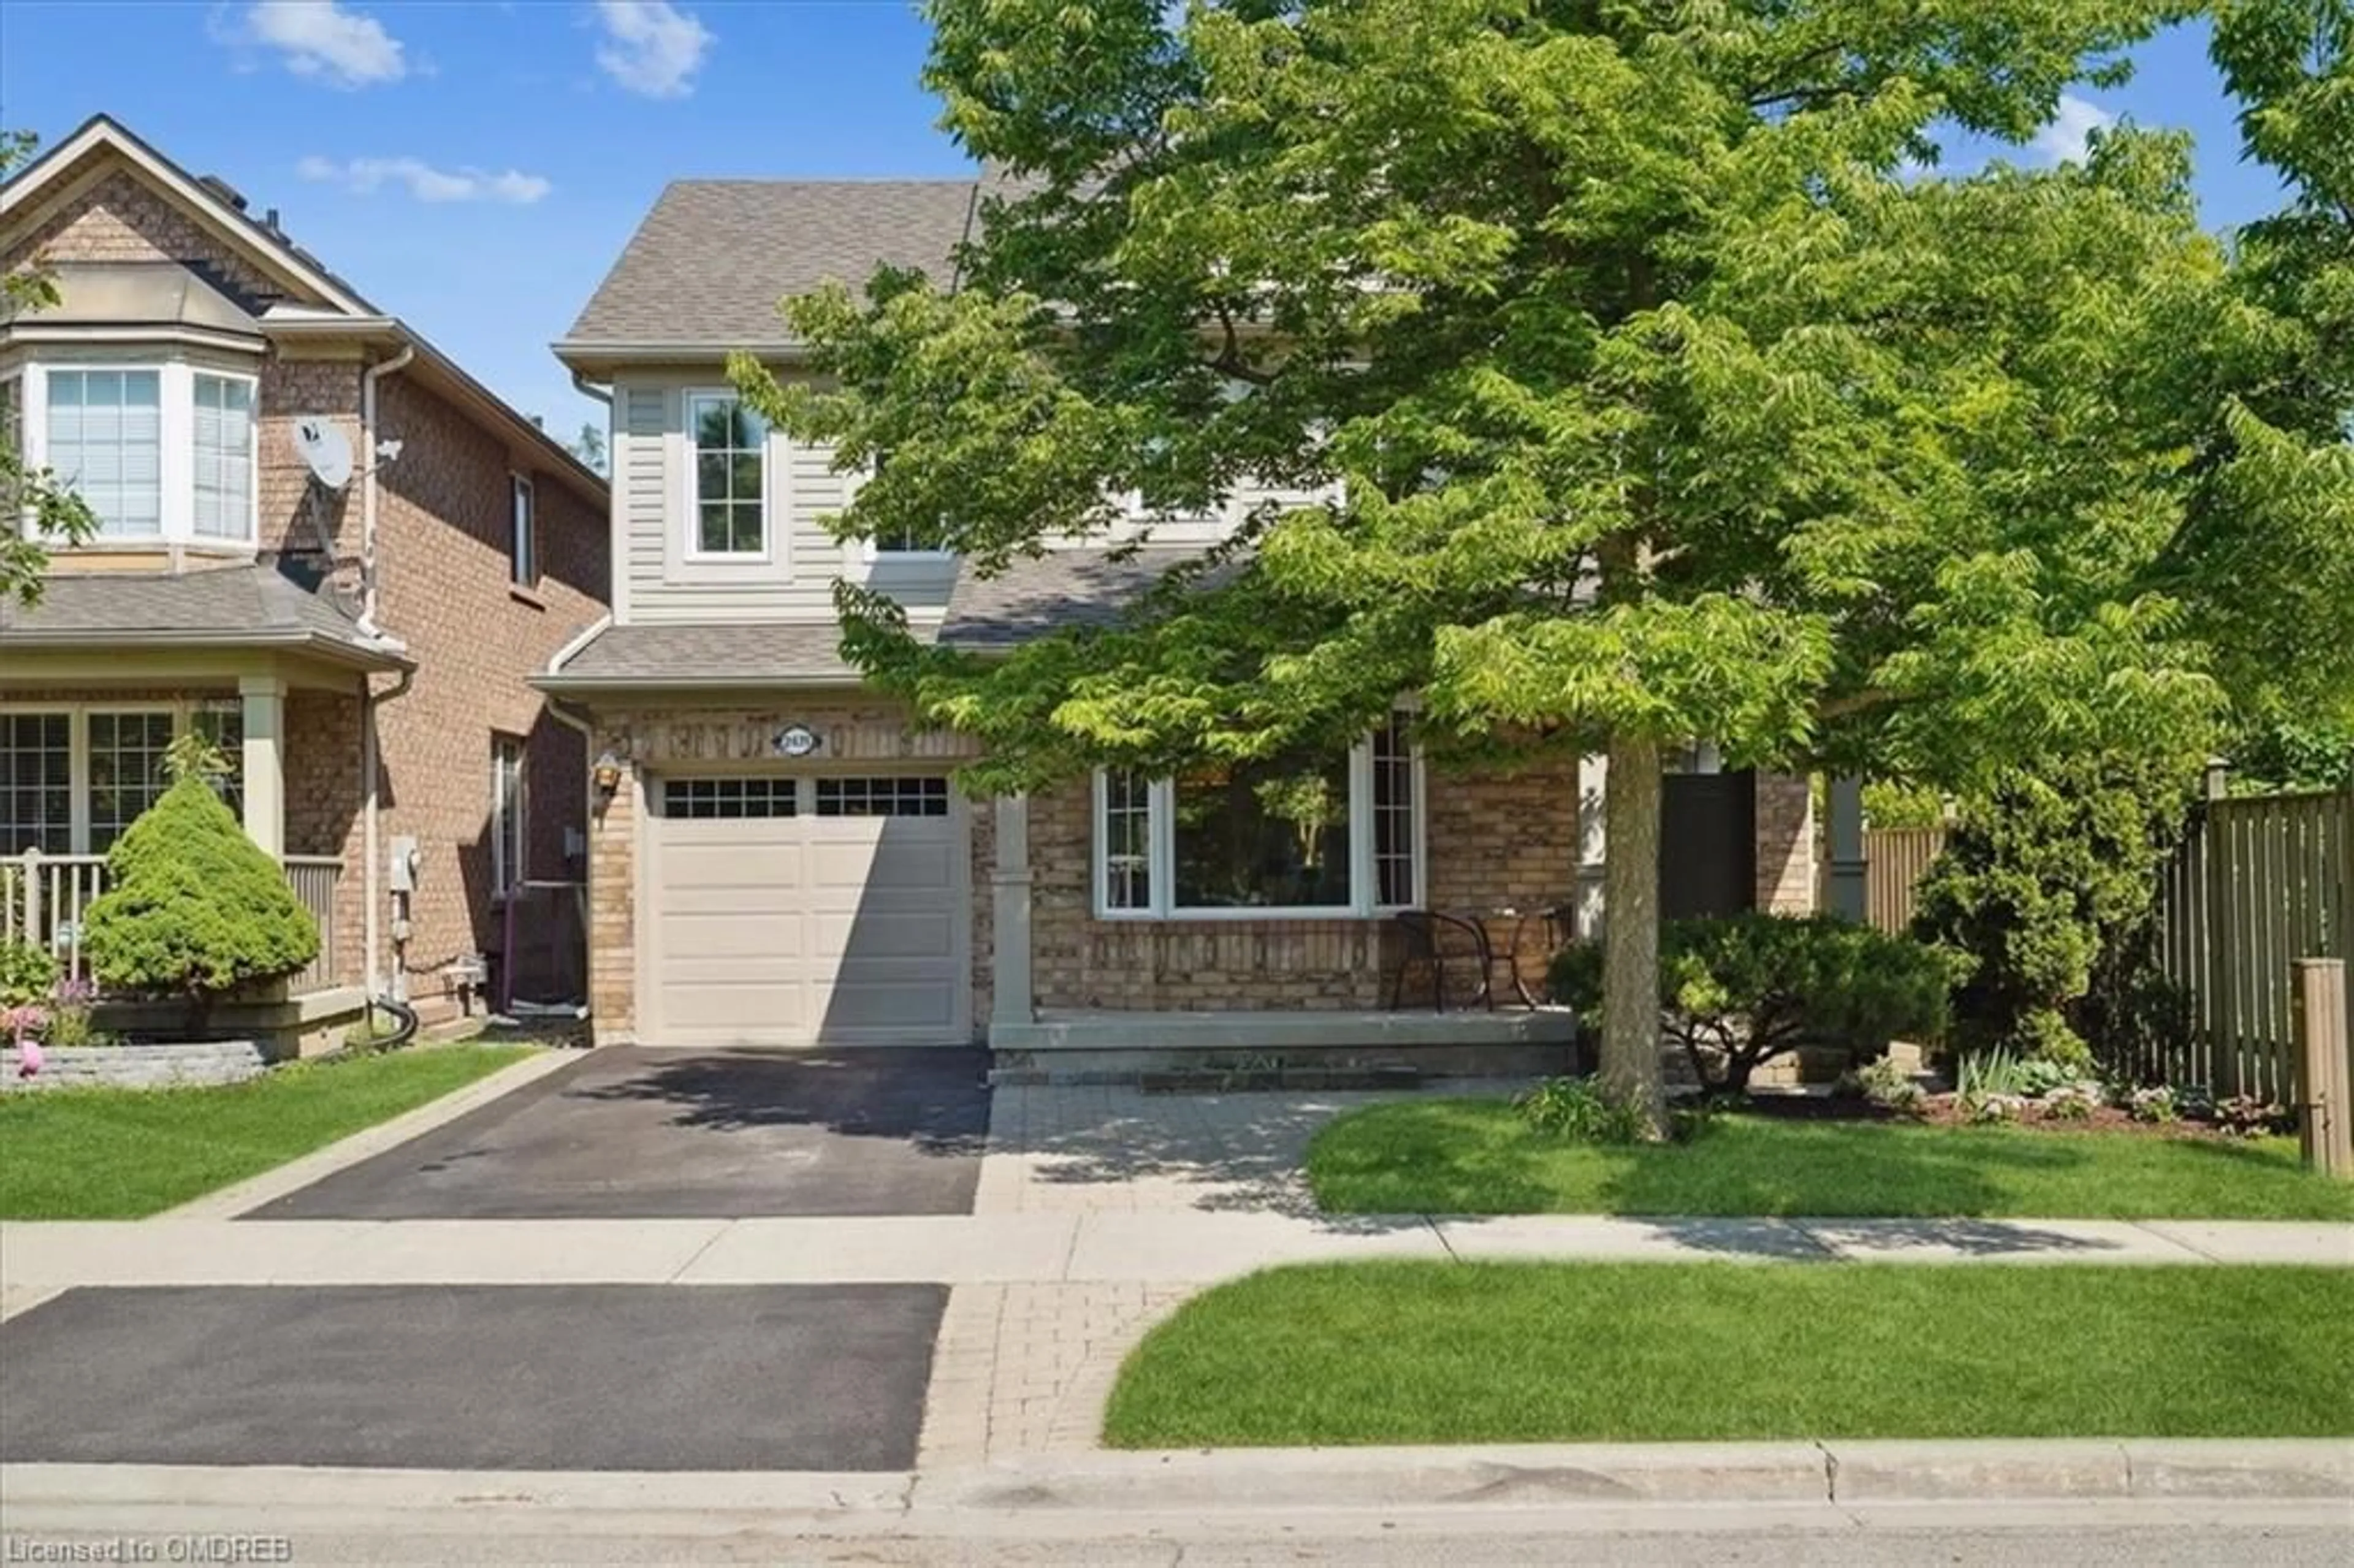 Home with brick exterior material for 2471 Nettlecreek Cres, Oakville Ontario L6M 4C1